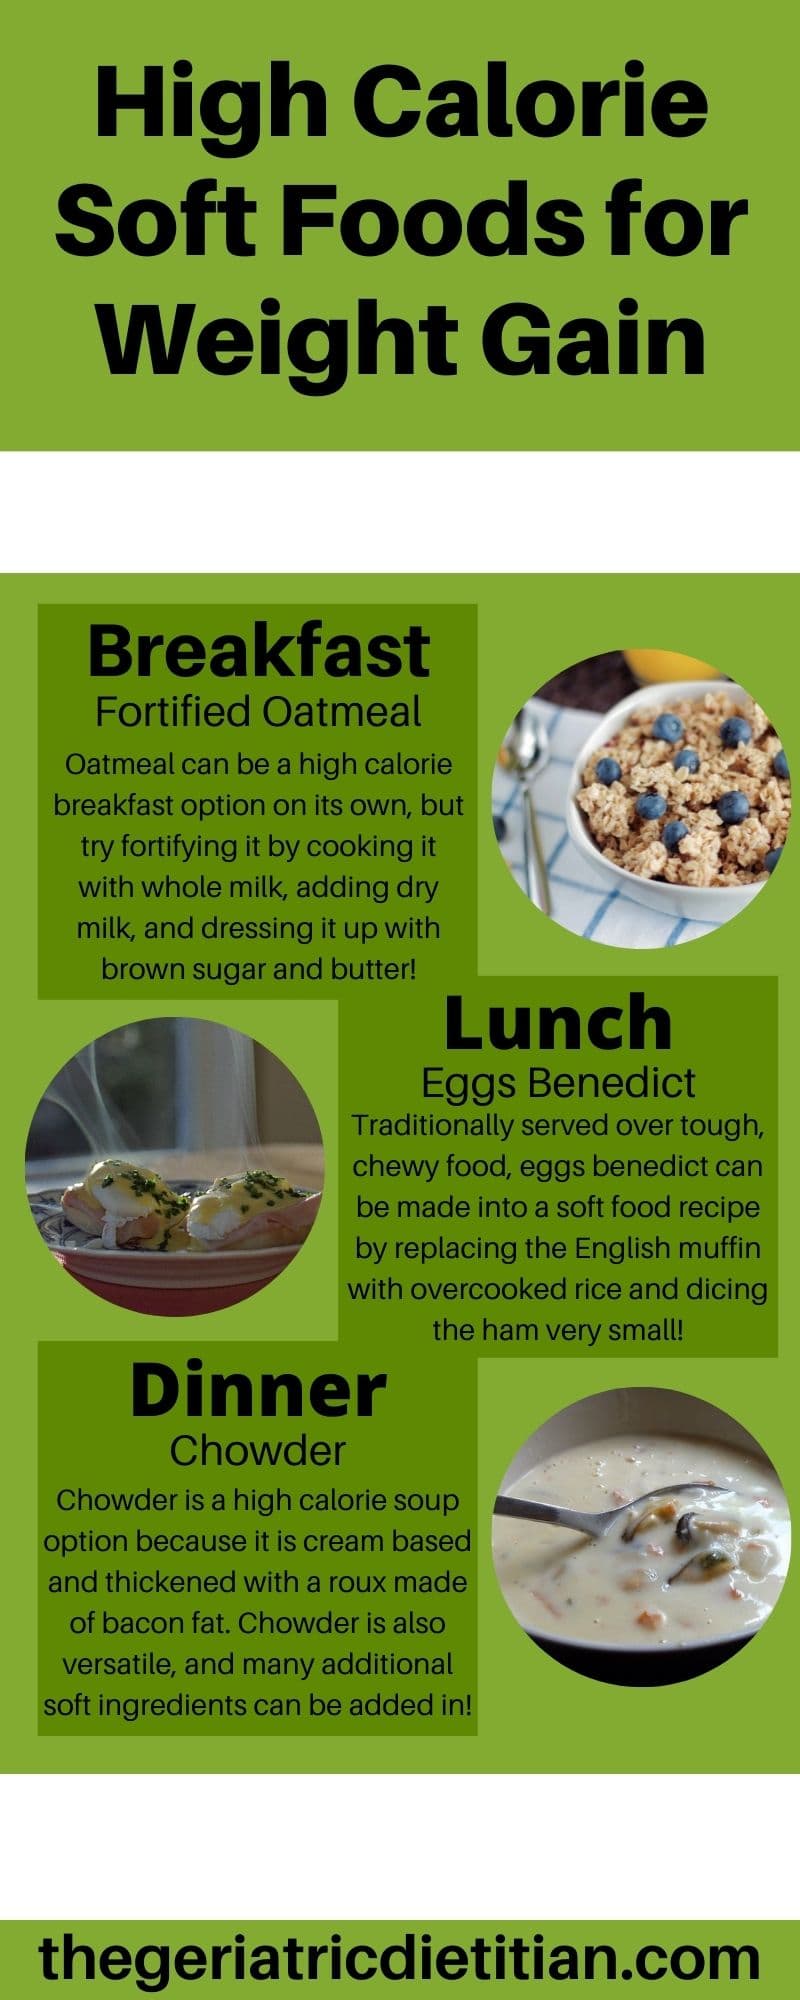 https://thegeriatricdietitian.com/wp-content/uploads/2021/09/High-Calorie-Soft-Foods-for-Weight-Gain-infographic.jpg